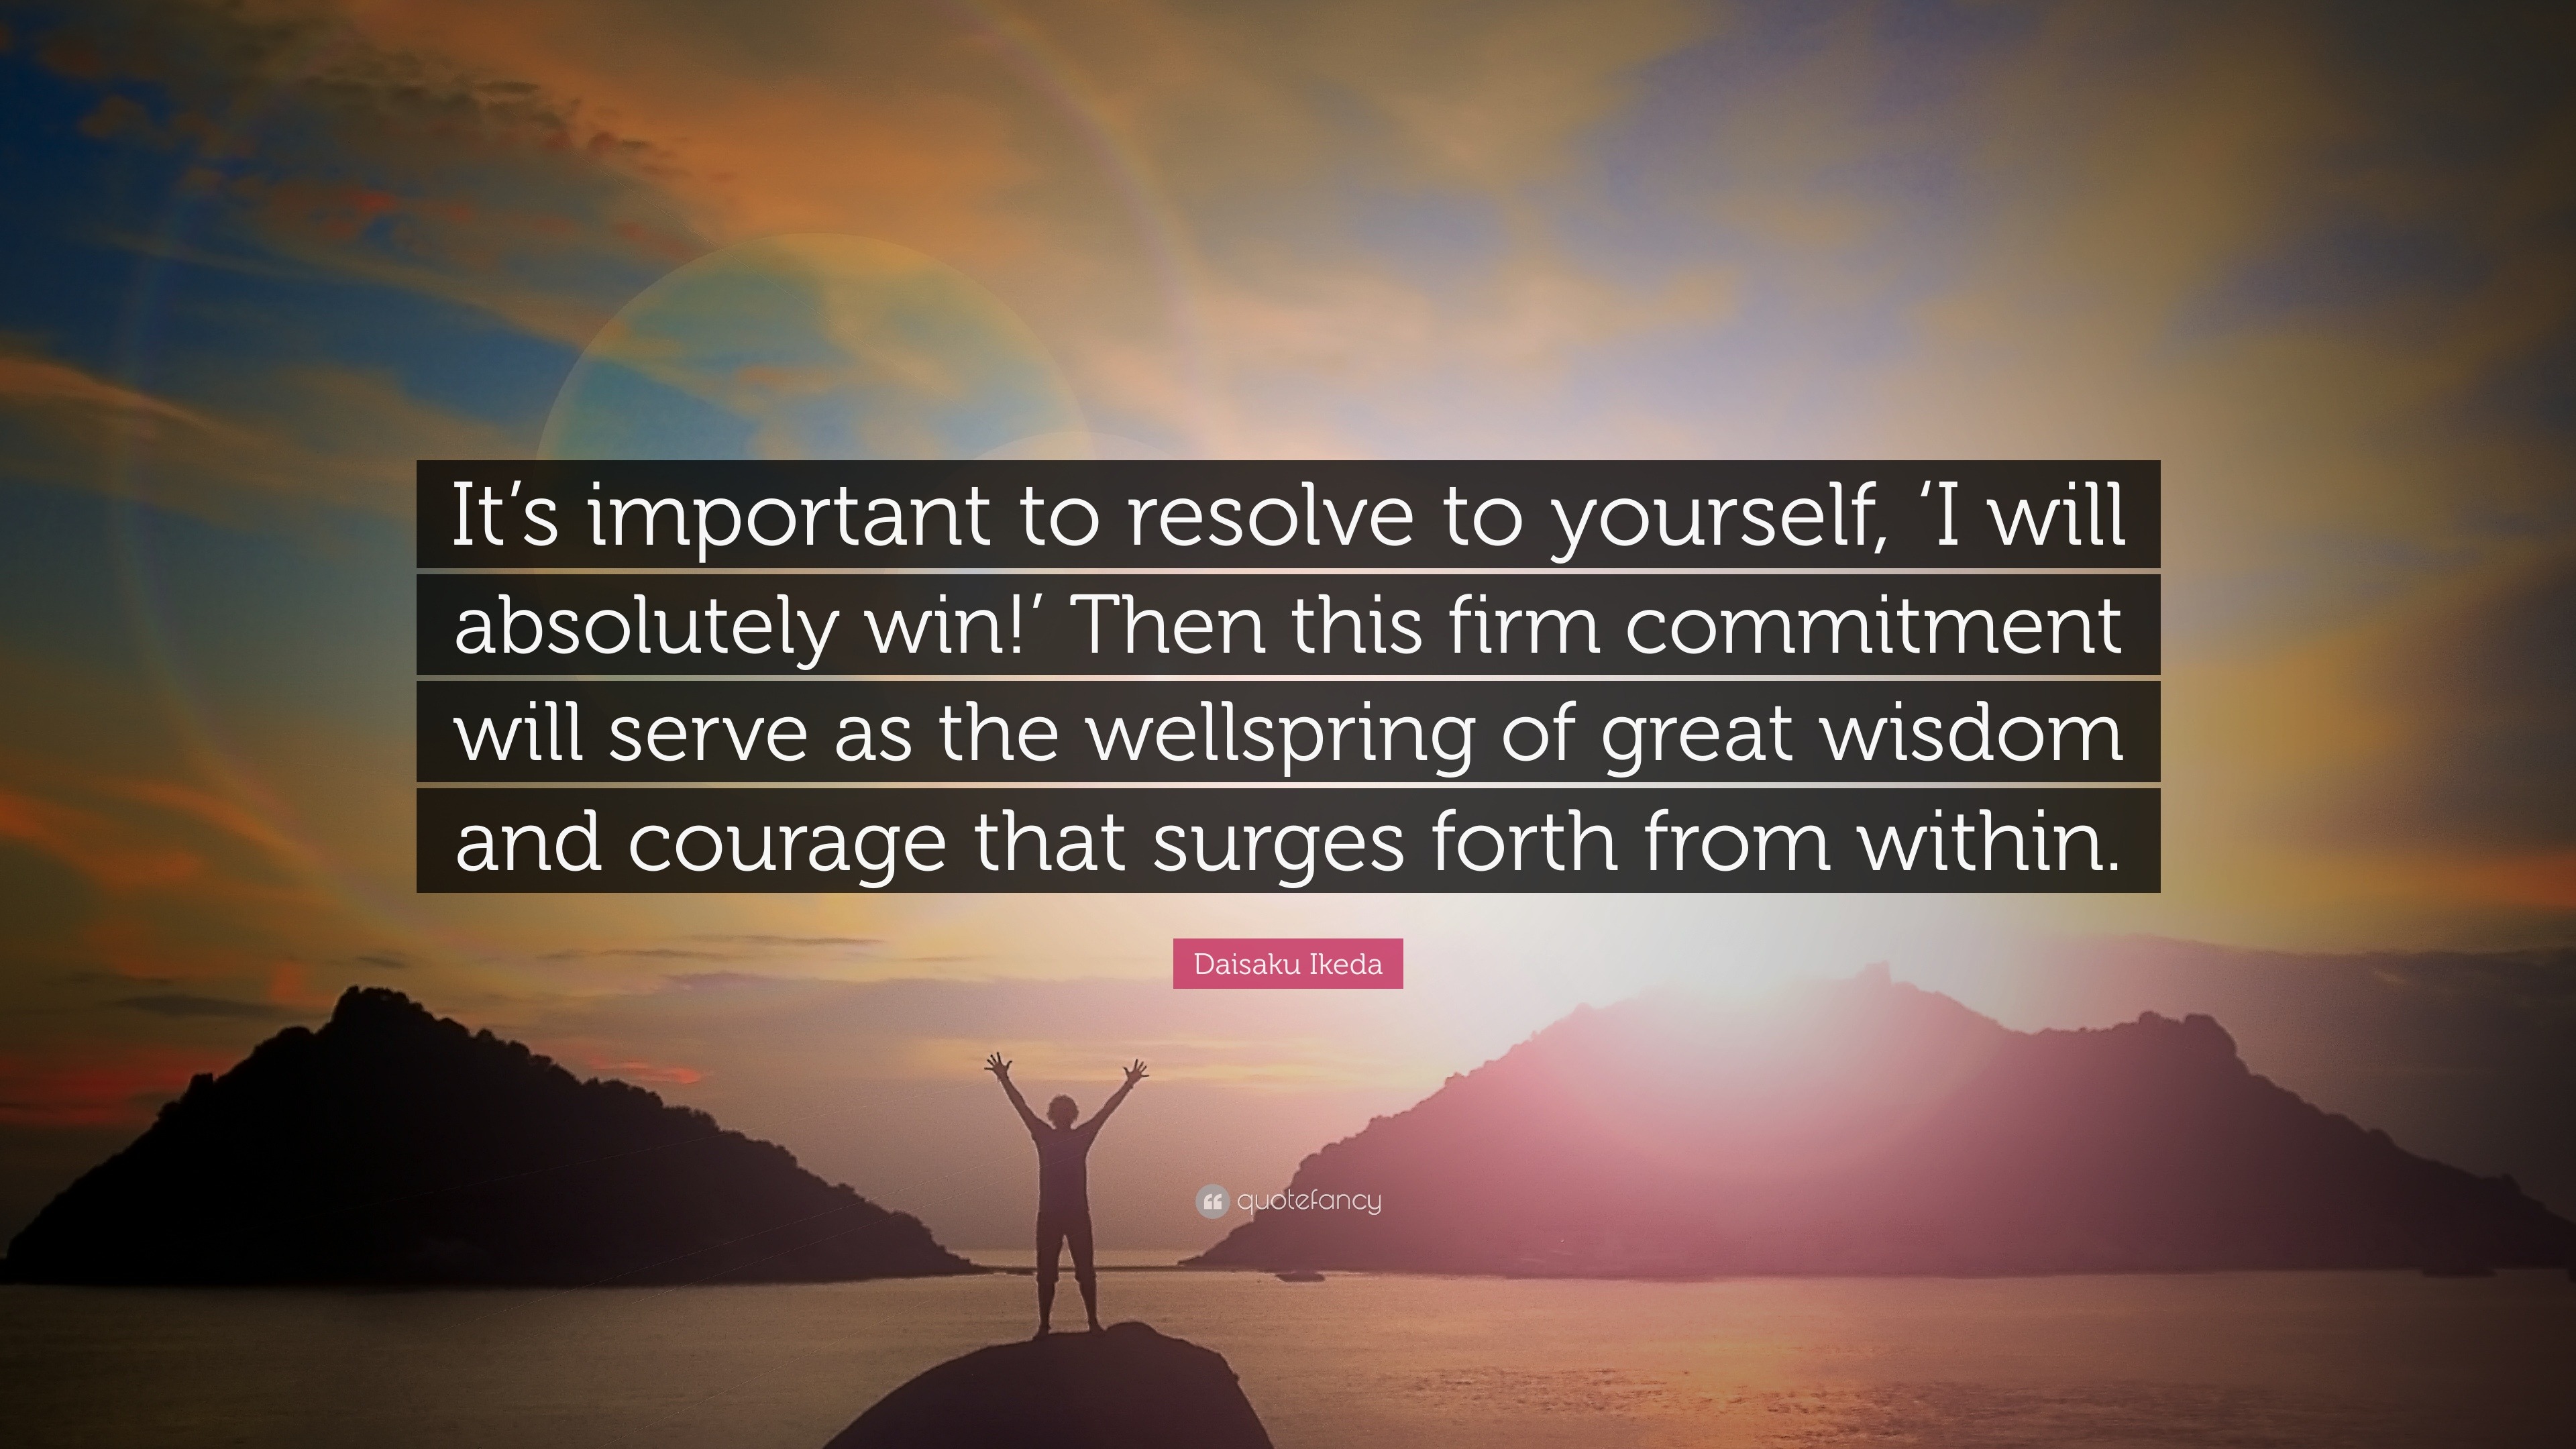 Daisaku Ikeda Quote: “It’s important to resolve to yourself, ‘I will